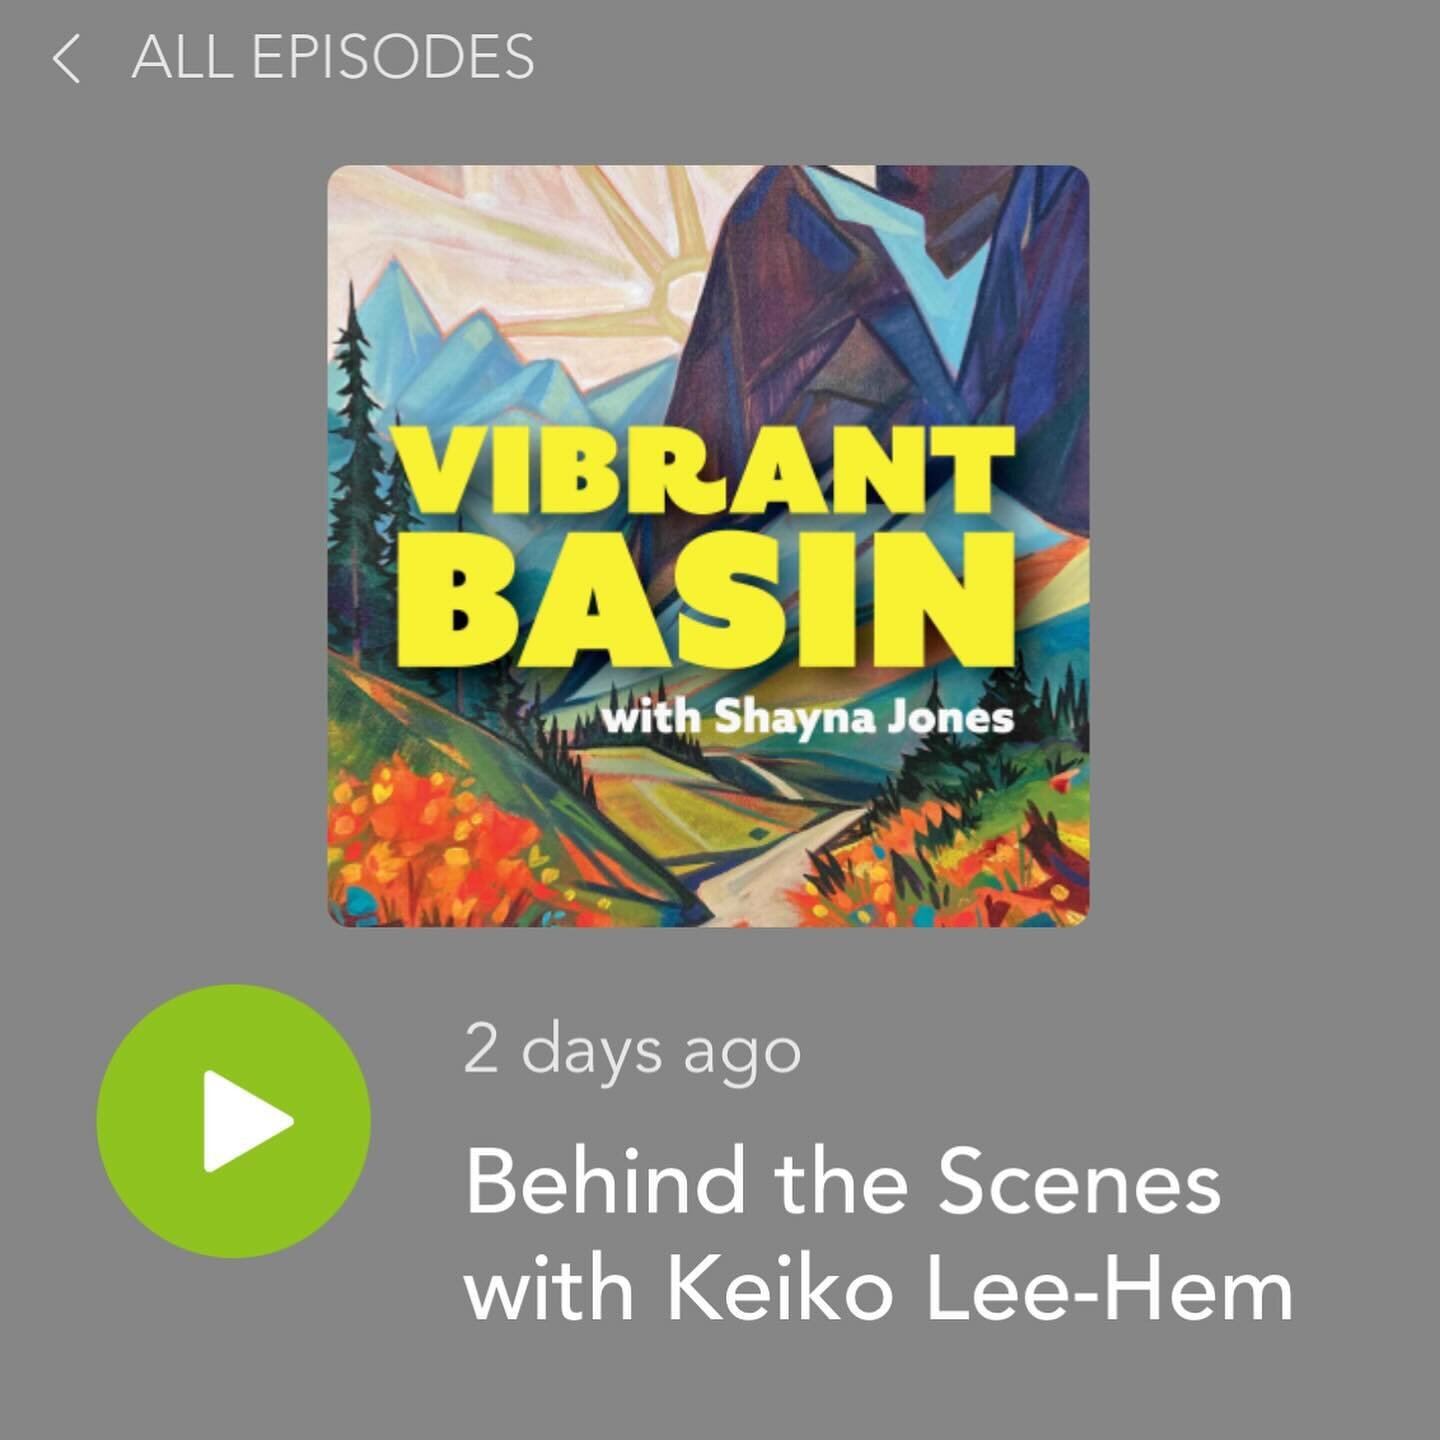 My behind-the-scenes episode on the Vibrant Basin podcast is live, friends! 💛

https://wkrac.podbean.com/e/keiko/

My first listen this morning had me literally sweating 😅 but afterwards I felt pretty proud. 

Shayna is such a warm interviewer, and